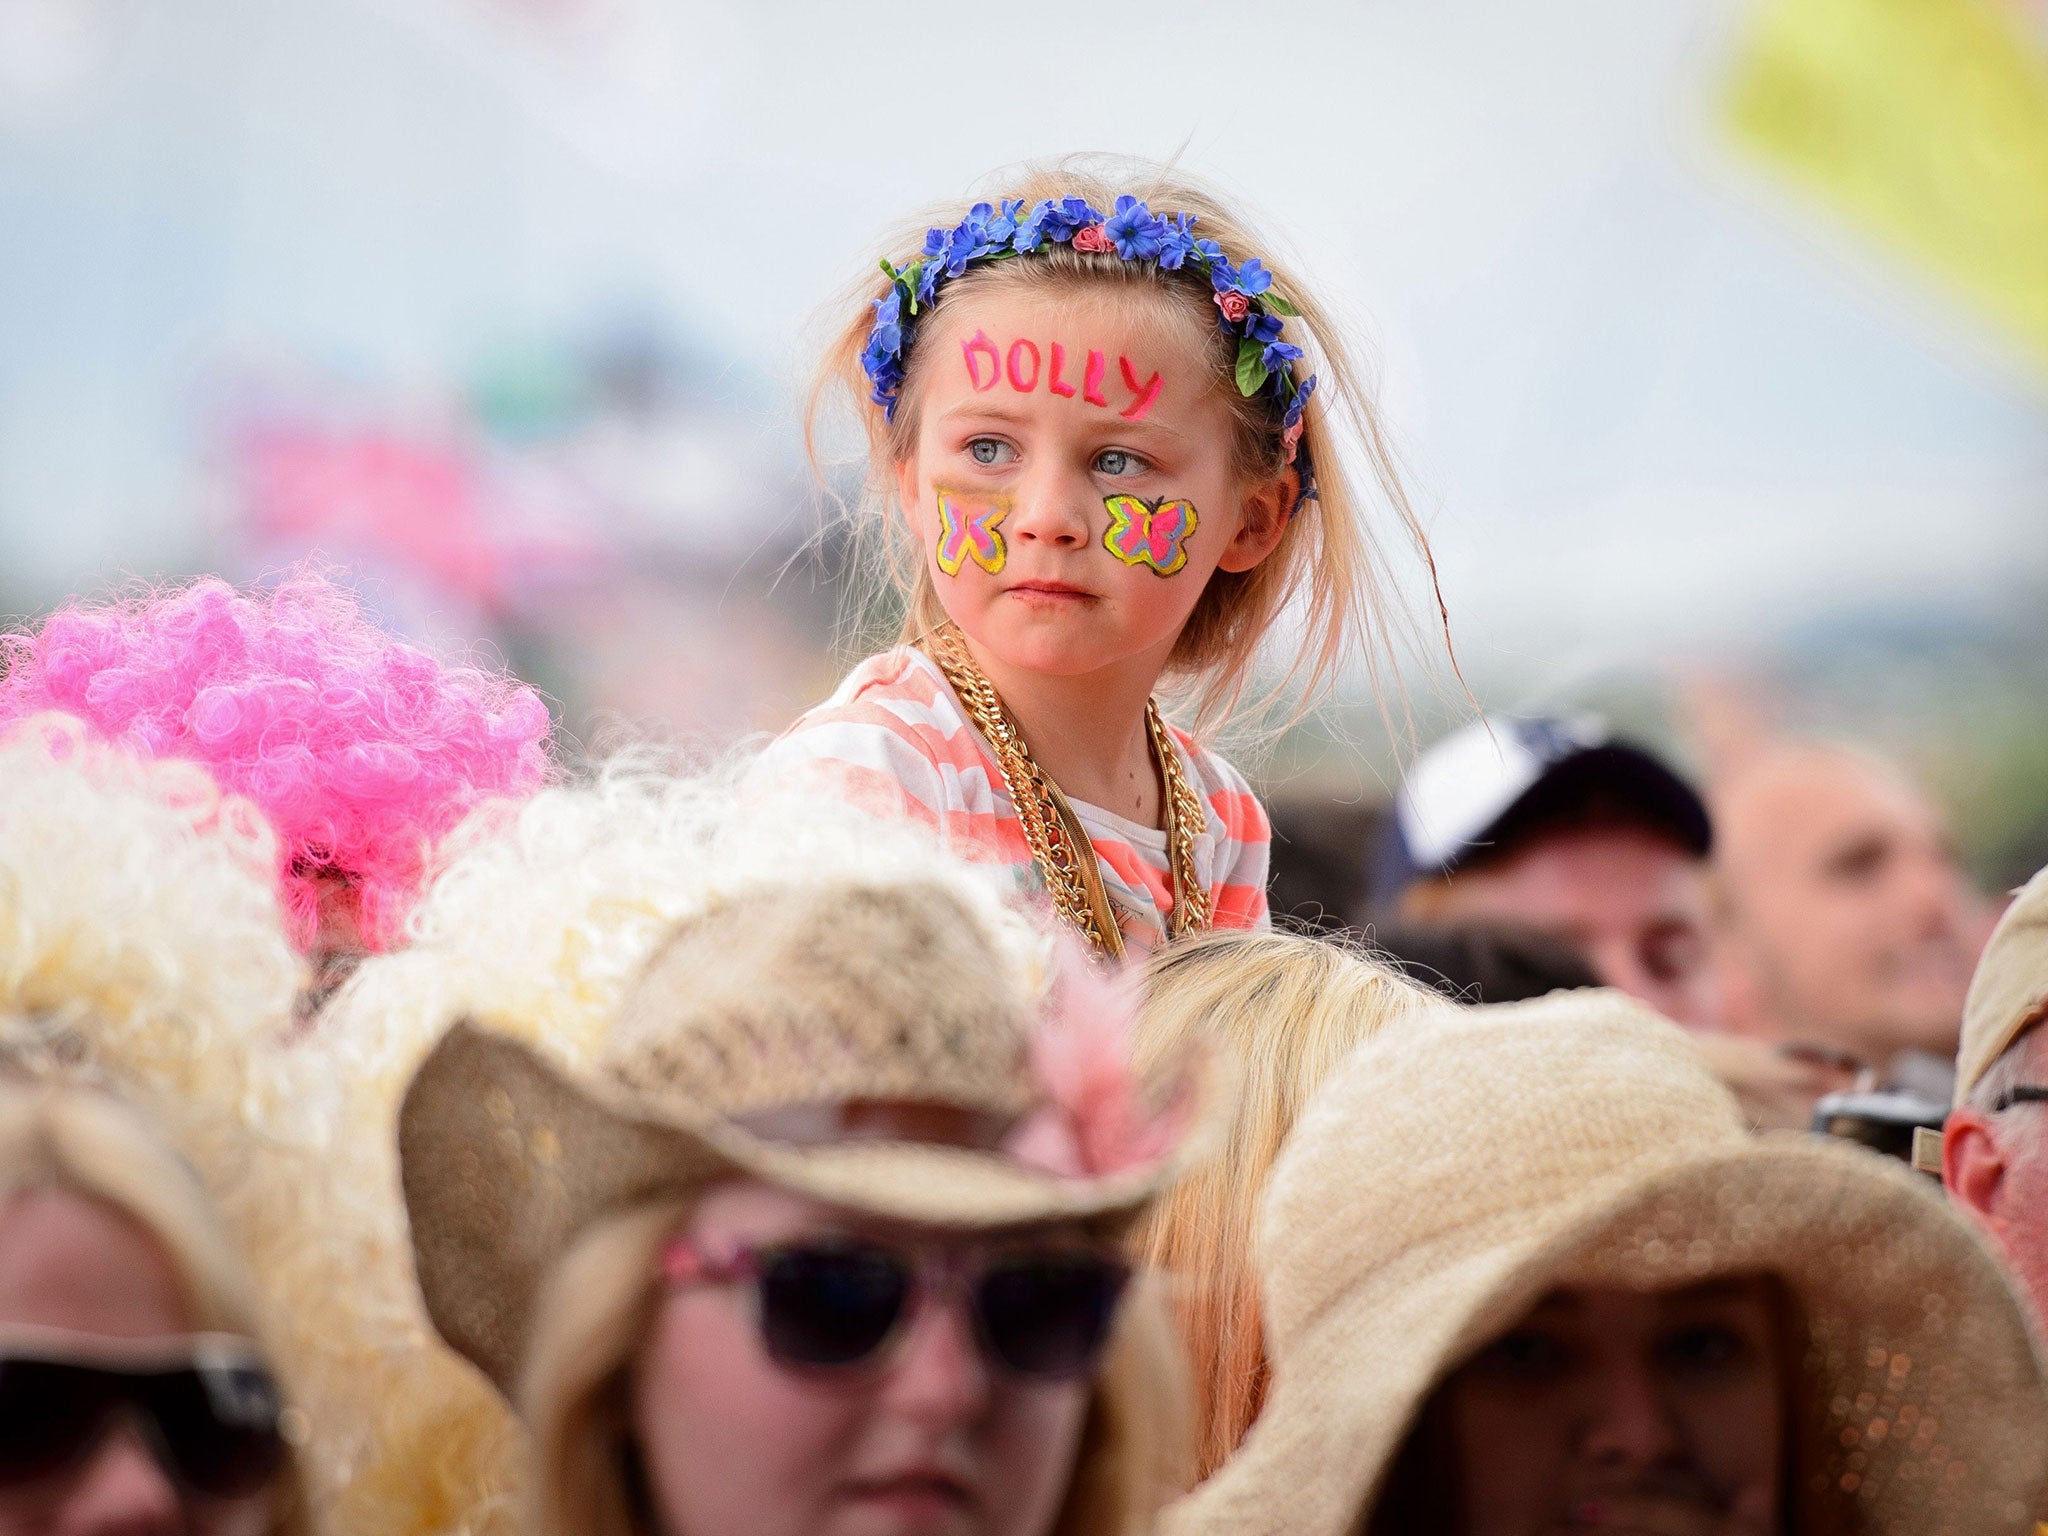 Fans enjoy the music as US singer Dolly Parton performs on the Pyramid Stage, on the final day of the Glastonbury Festival of Music and Performing Arts on Worthy Farm in Somerset